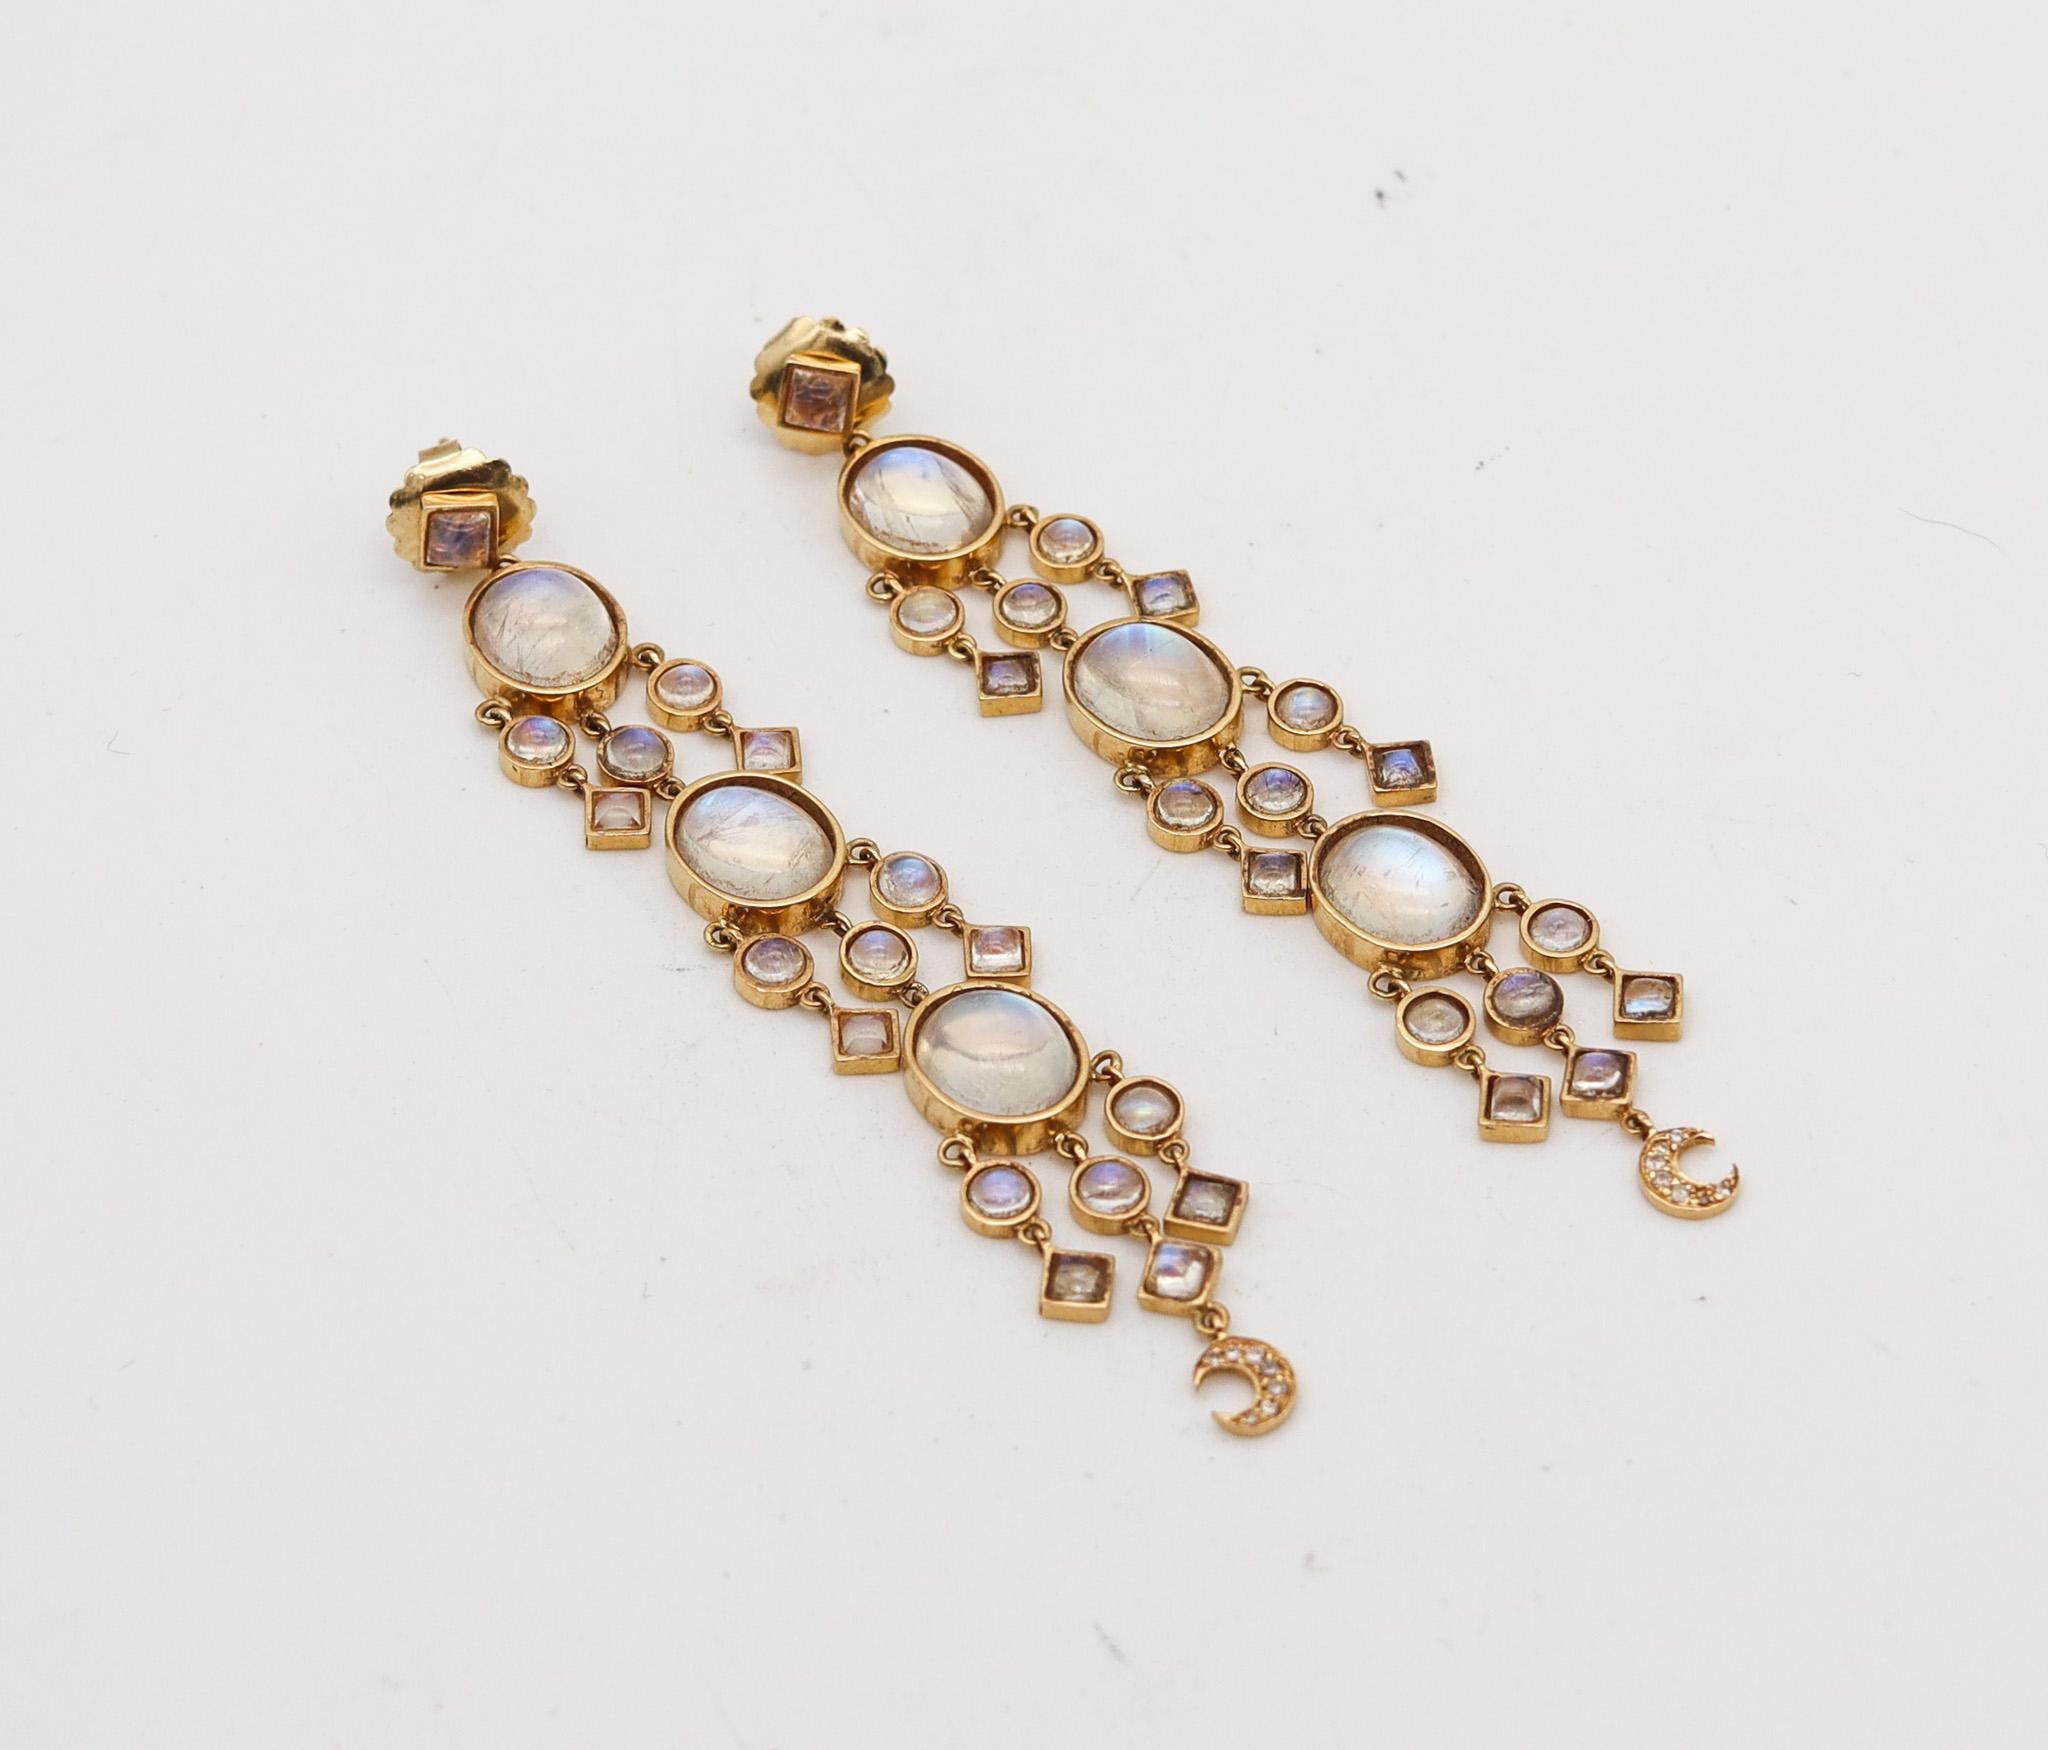 Long Dangle-drops earrings designed by Temple St. Claire.

Beautiful long dangle earrings, created by the jewelry designer Temple St. Clair. These drop earrings has been crafted at her workshop studio in Italy in solid yellow gold of 18 karats with